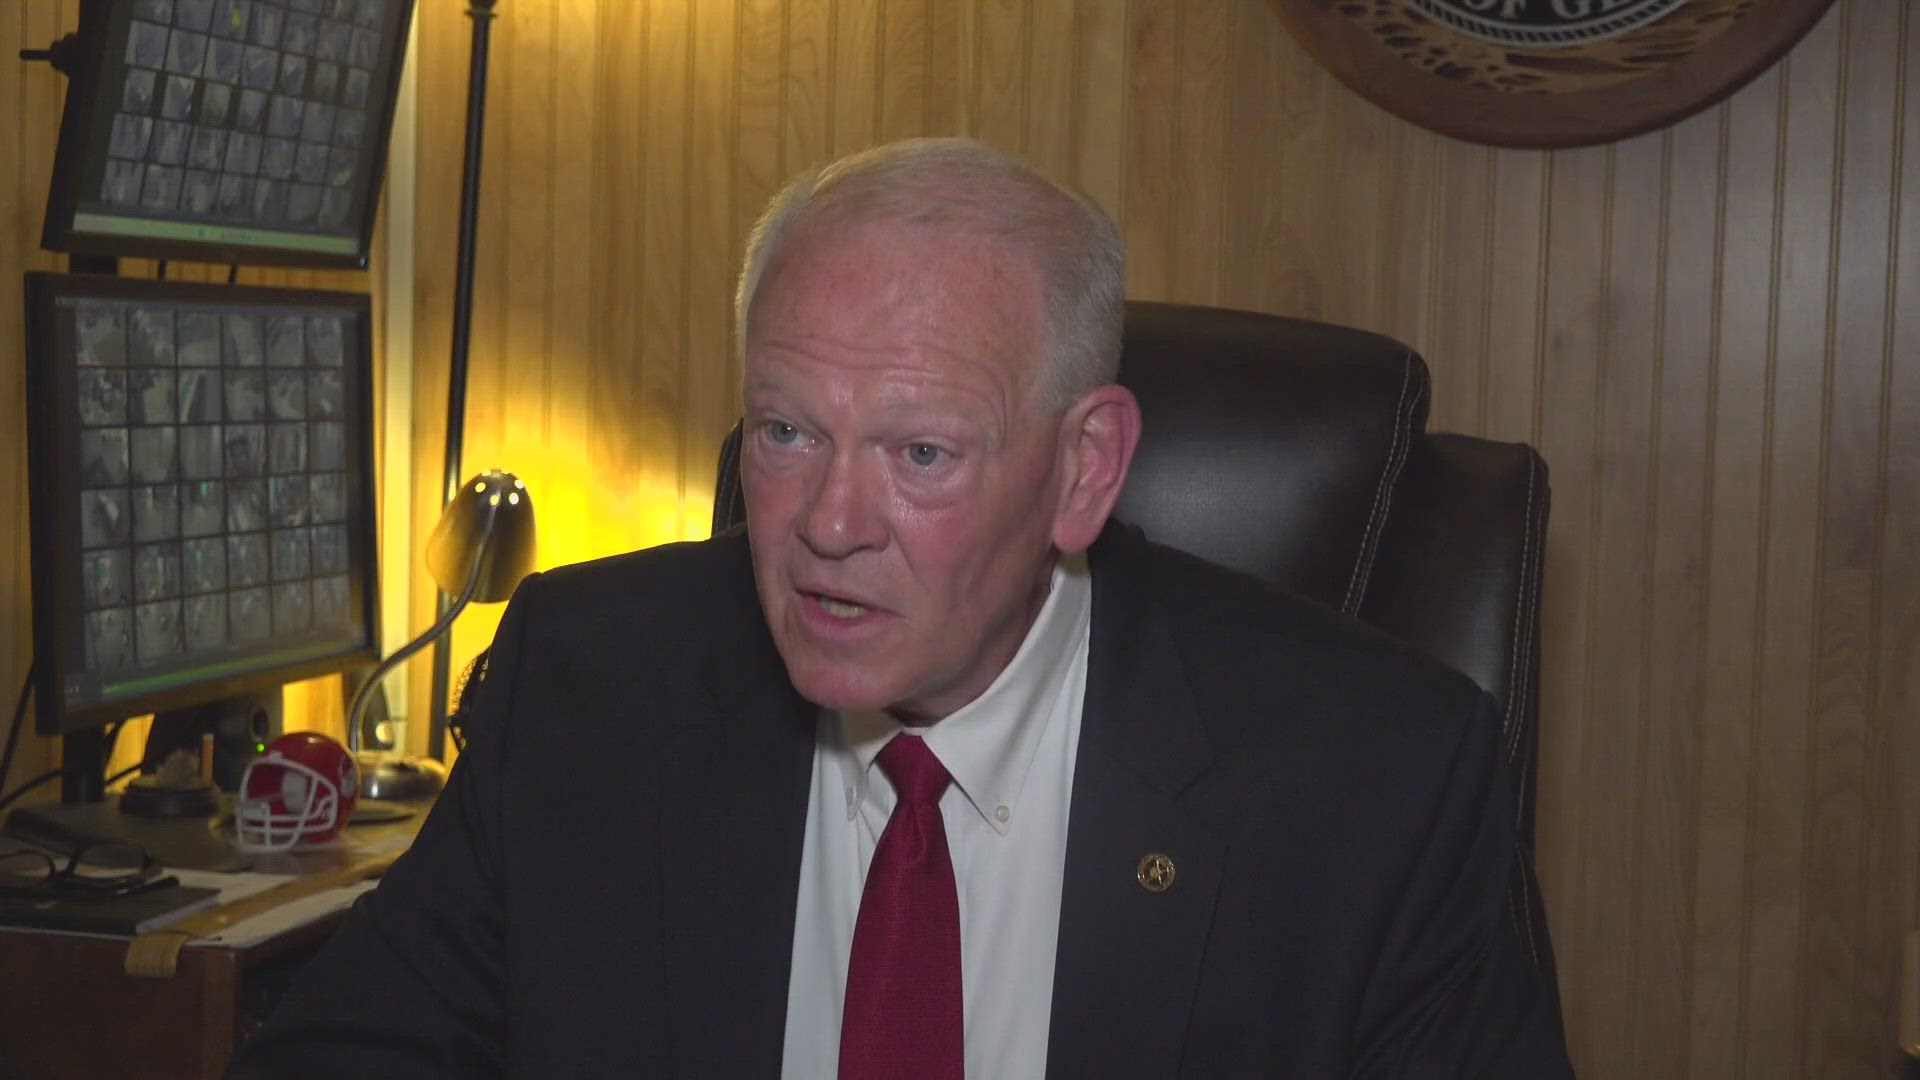 Sheriff Jim Proctor will not be on the May Primary Ballot. He will face the winner of the primary in November.